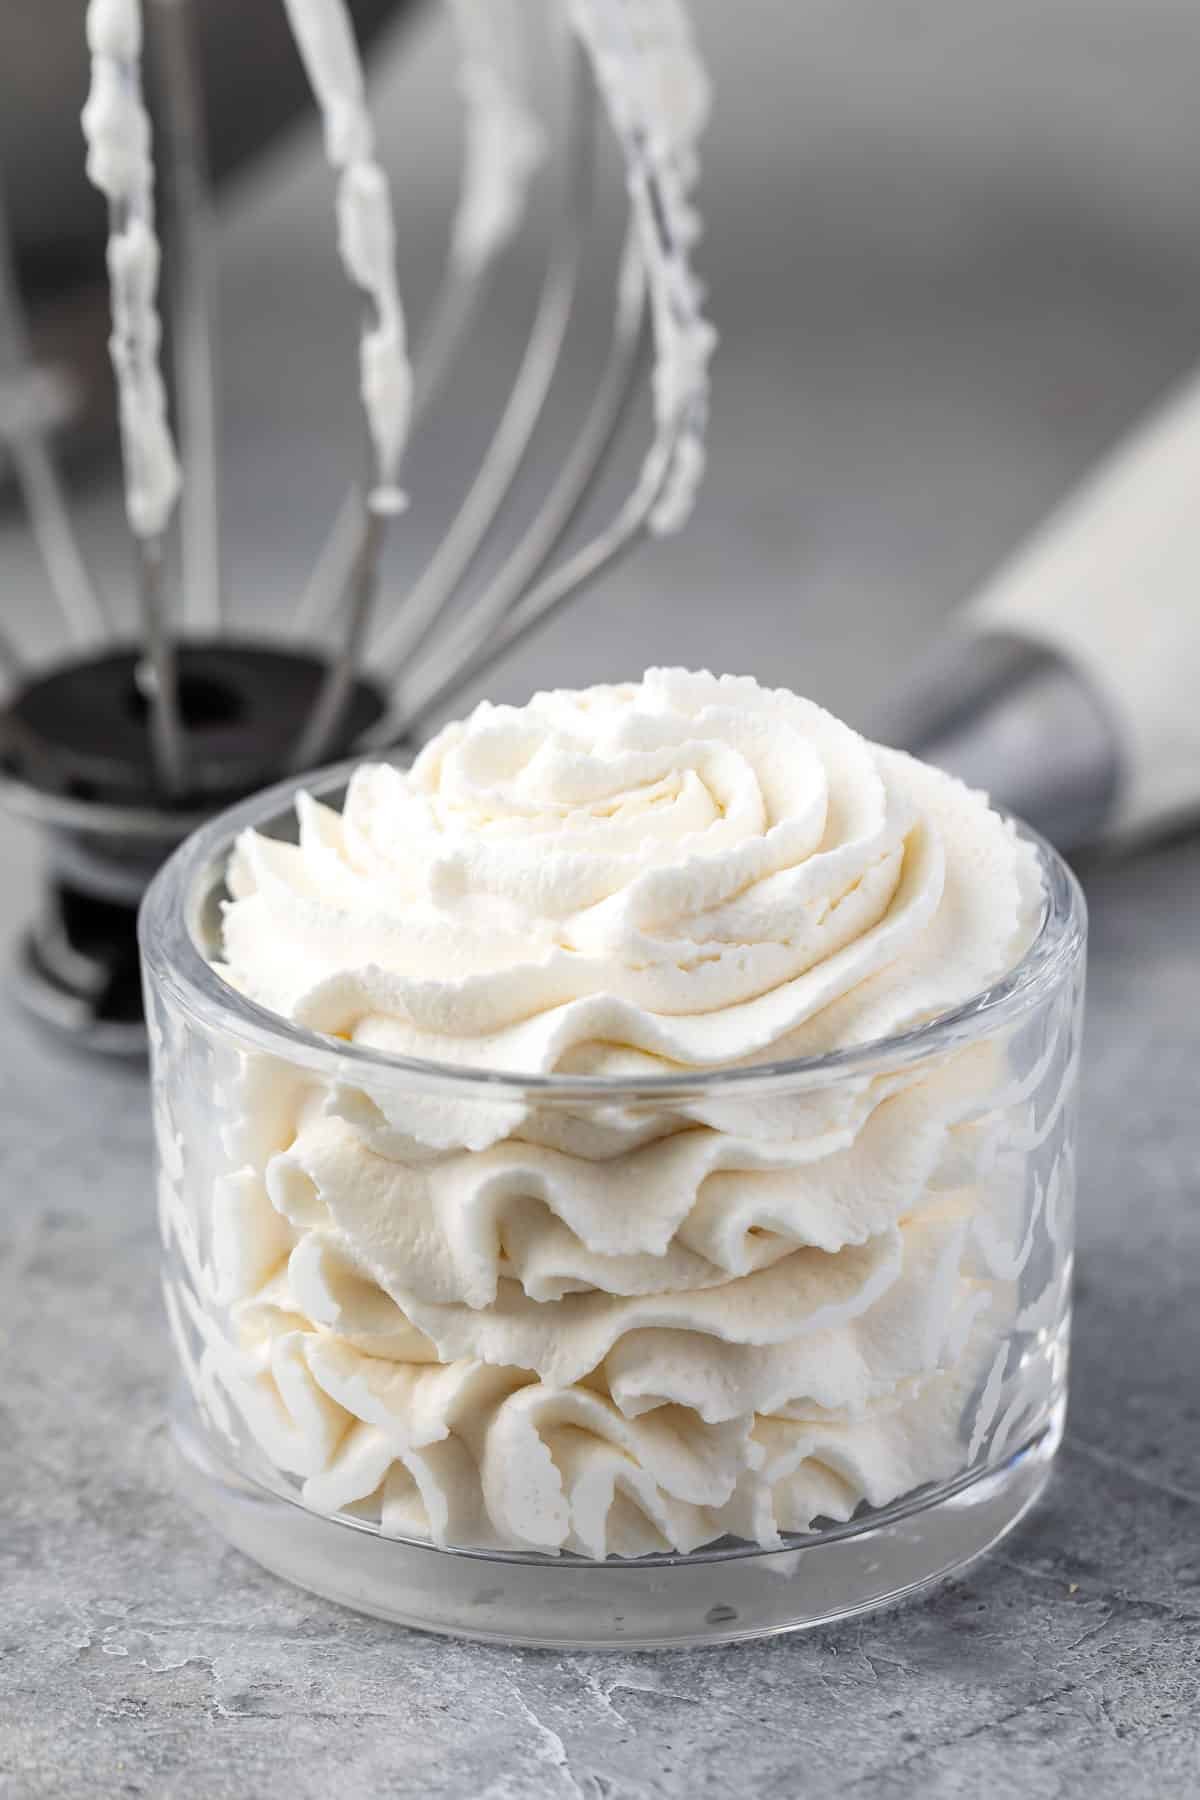 How to Make Whipping Cream Without Whipping Cream